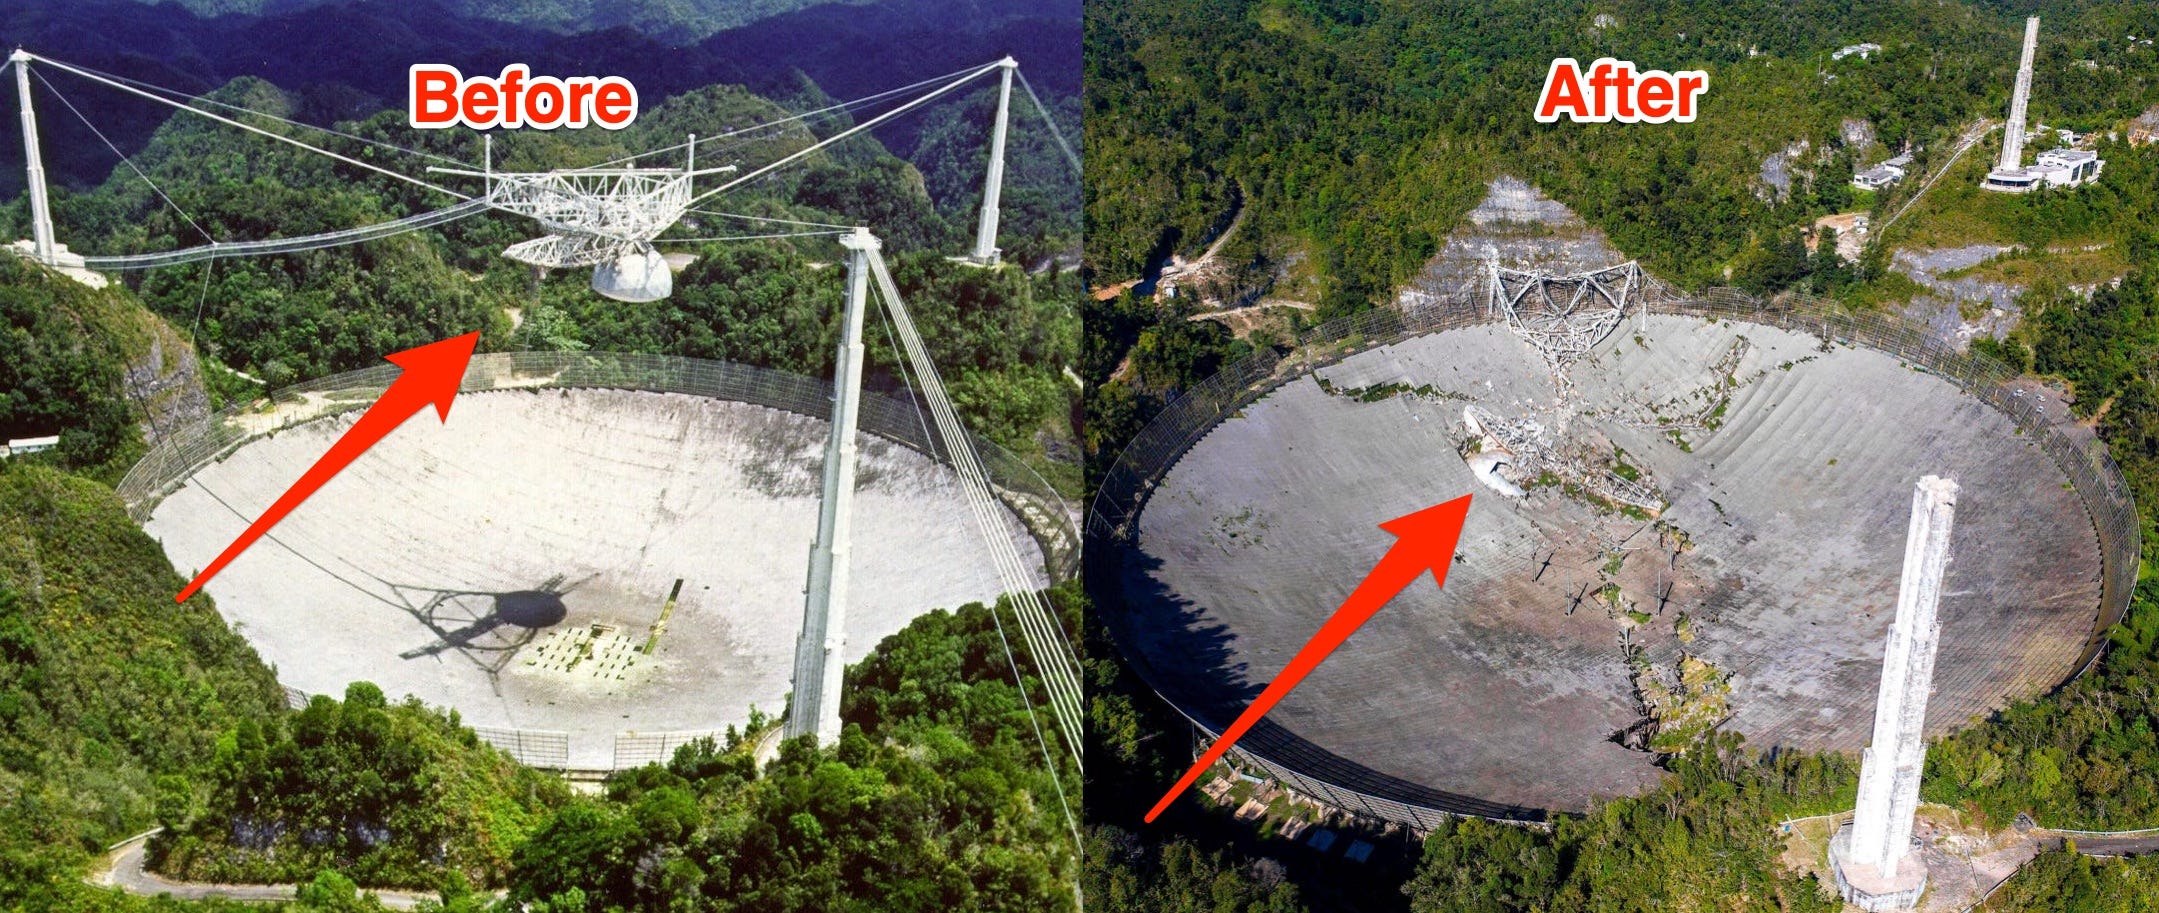 ARECIBO_BEFOREAFTER.skitch2